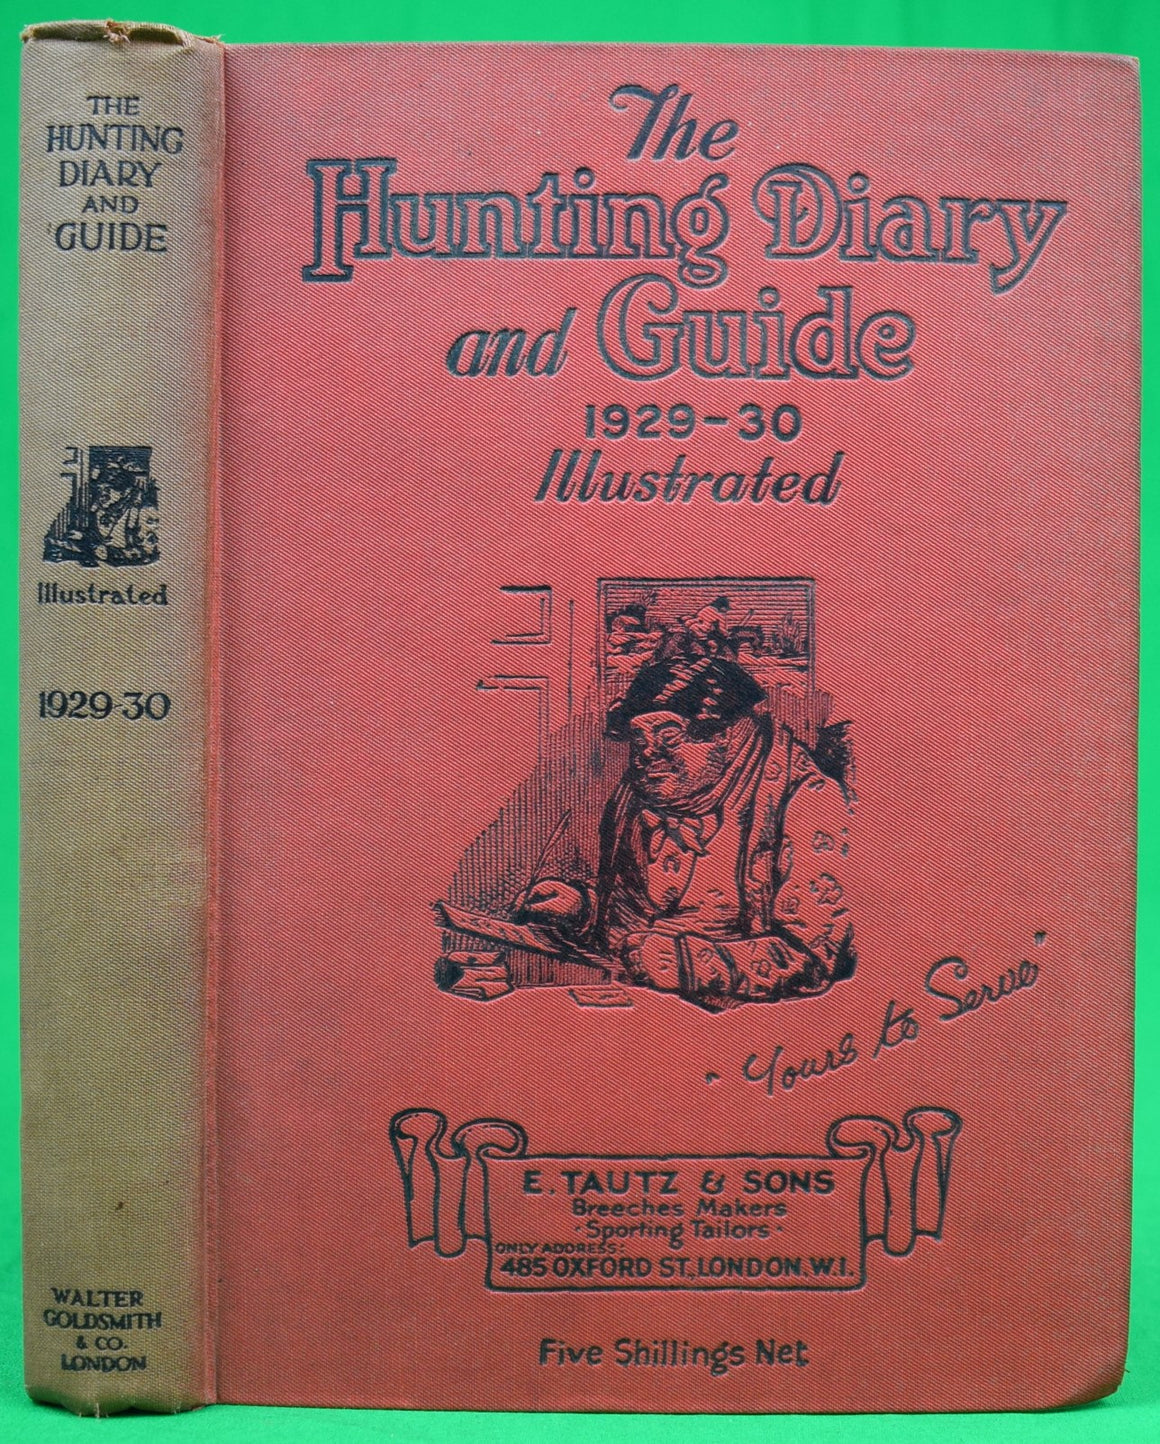 "The Hunting Diary And Guide 1929-30: A Guide And Handbook For Followers Of Hounds"